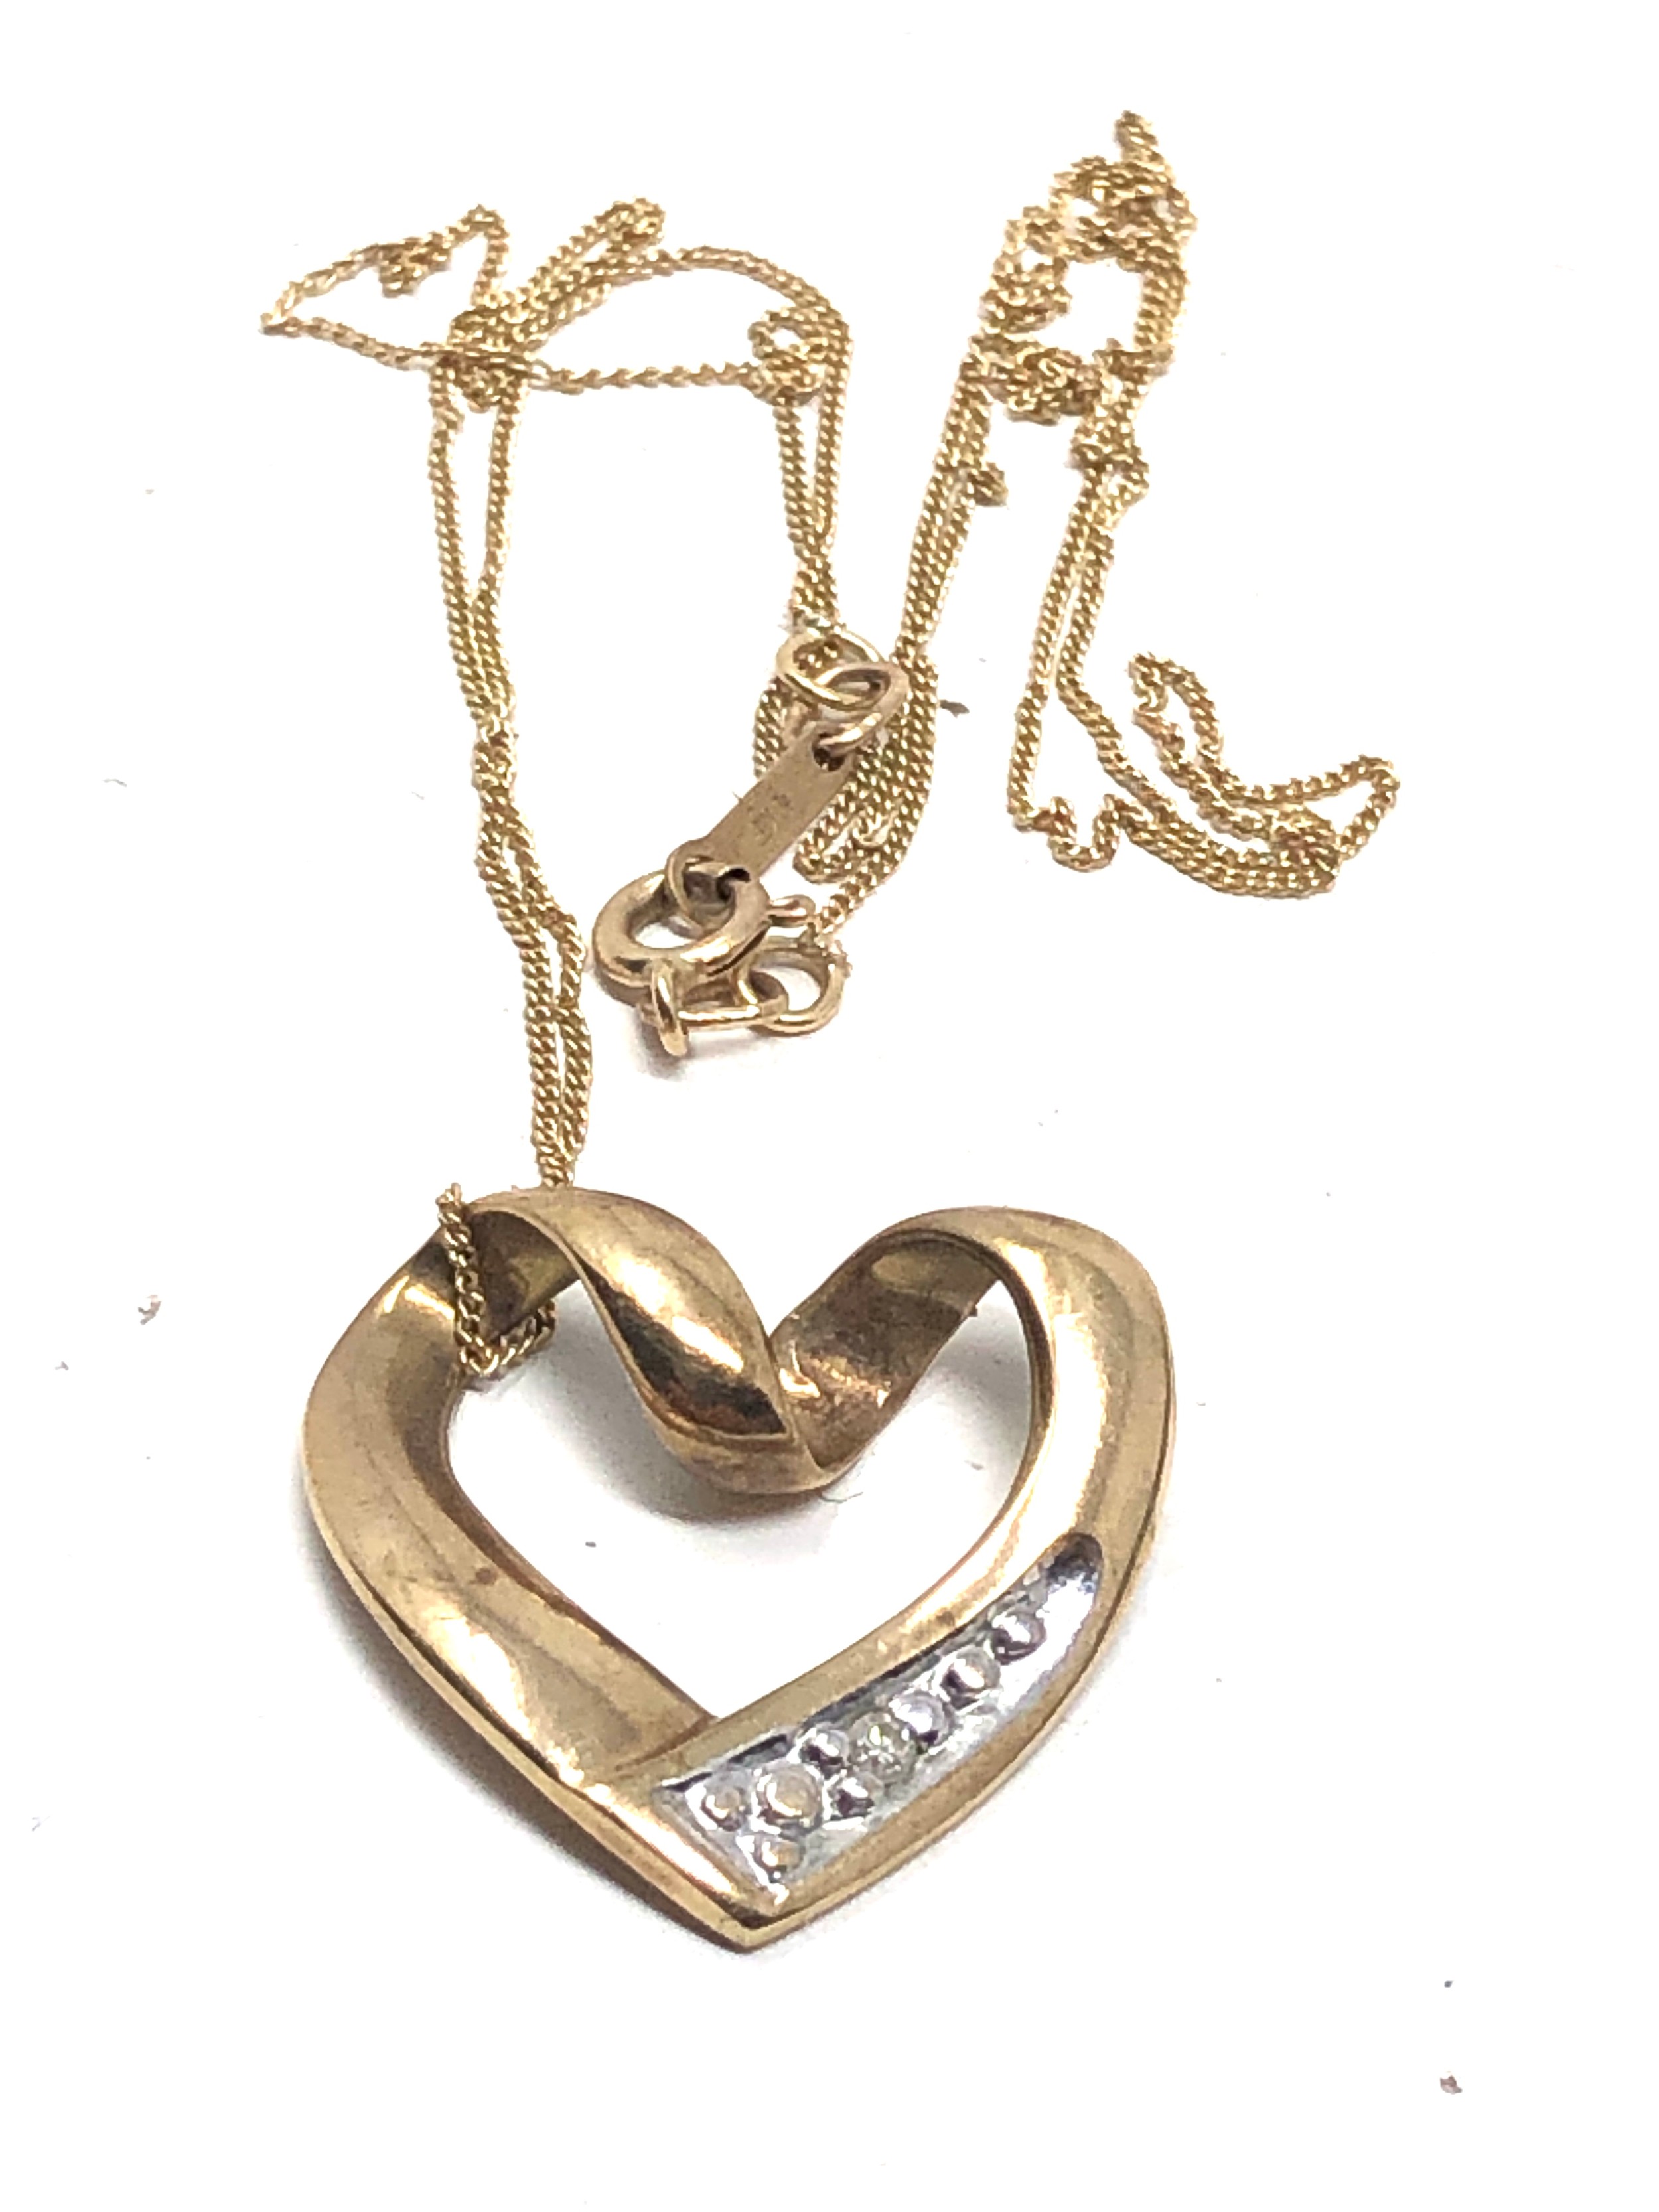 9ct gold diamond heart pendant necklace weight 2.5g - Image 2 of 4